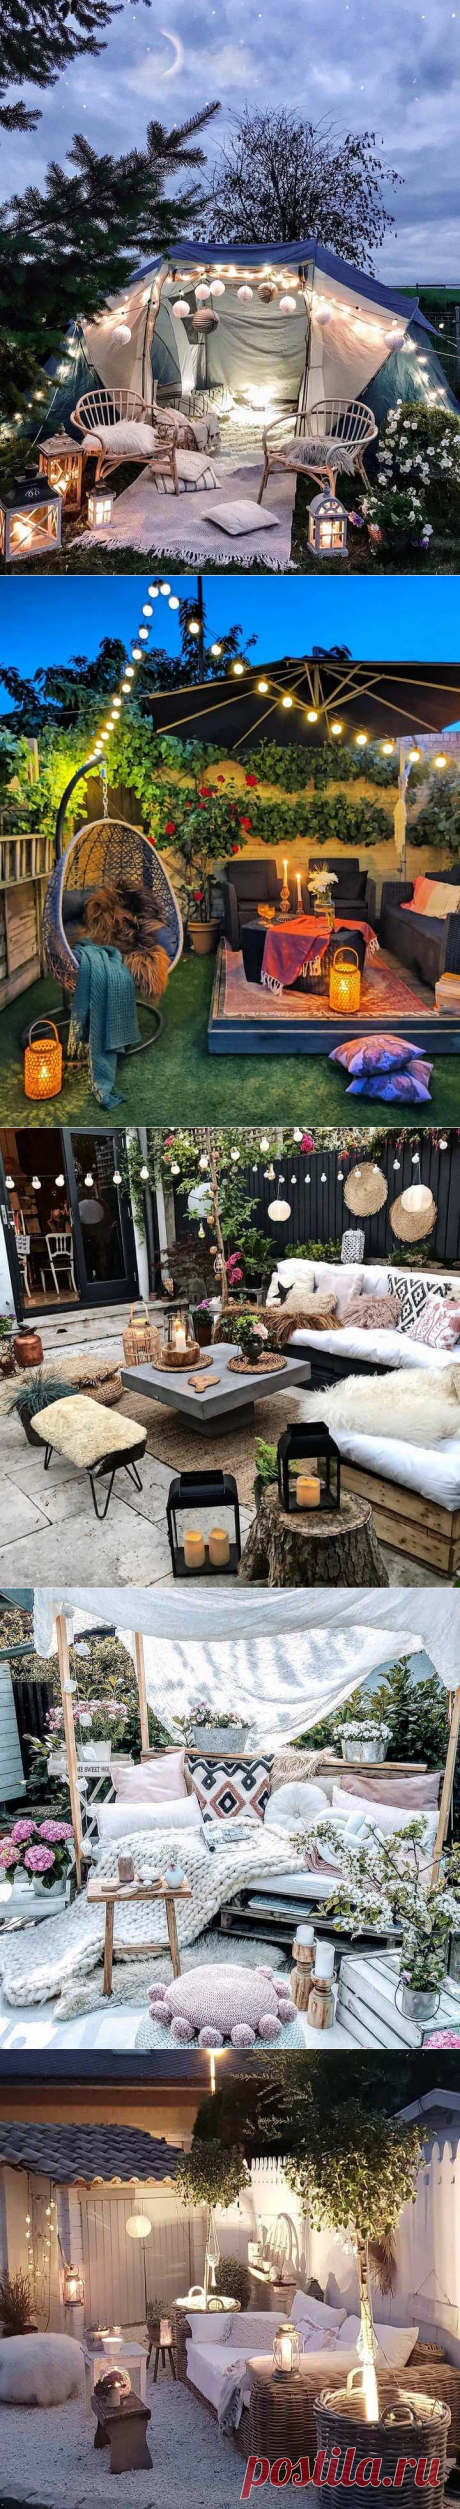 Bohemian Style Garden And Outdoor Living Ideas – Outdoor And Patio Ideas, Designs and DIY Plans.